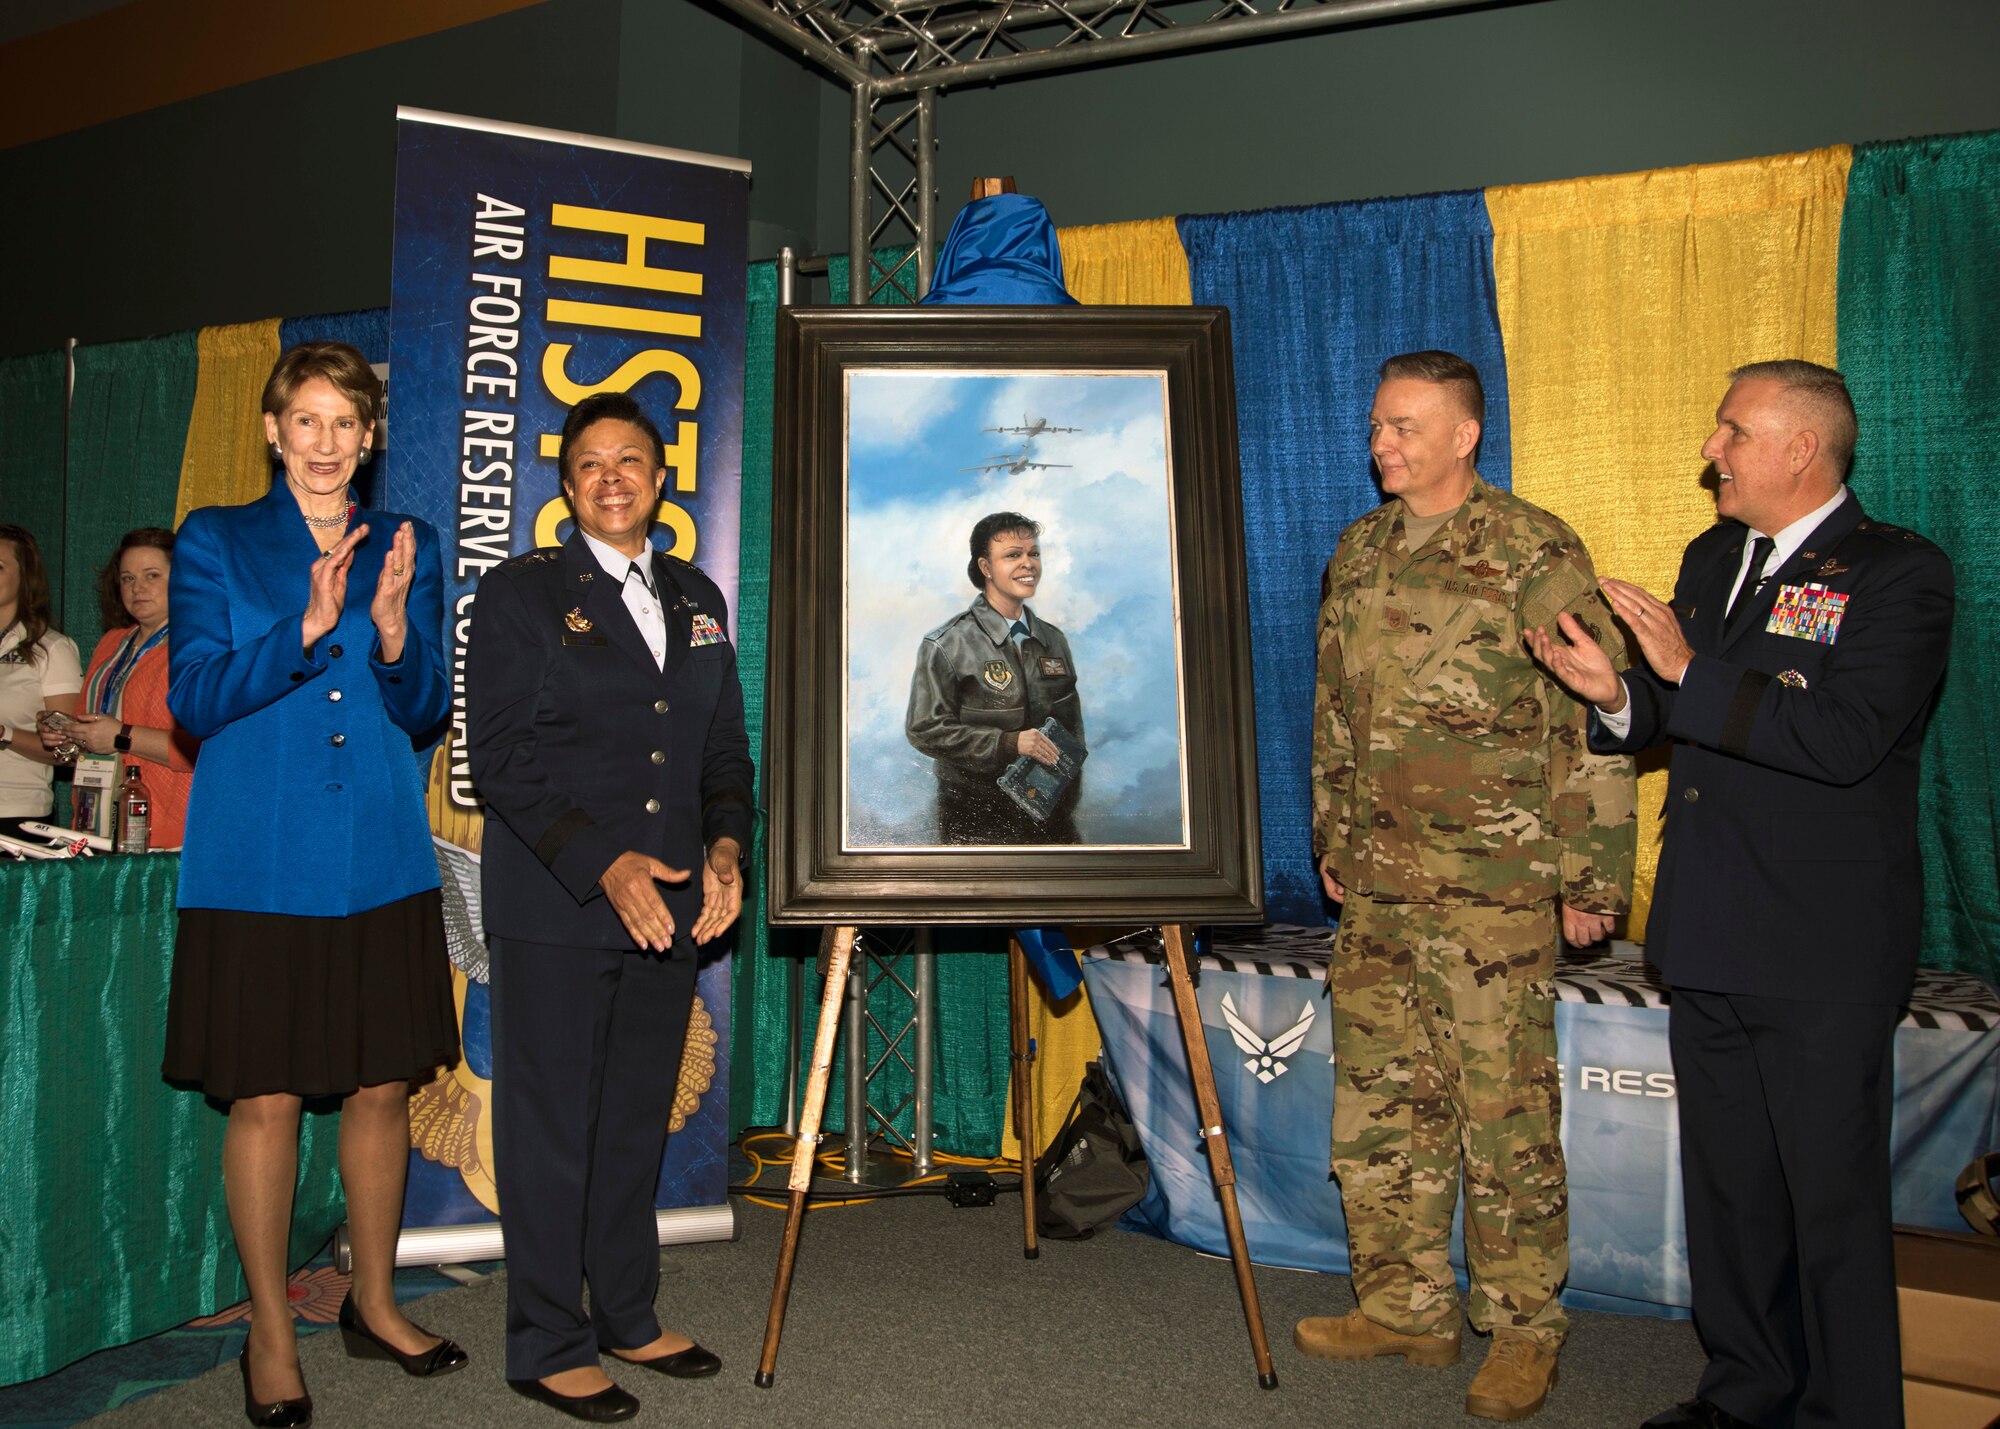 Image of Secretary of the Air Force Barbara Barrett, Lt. Gen. Stayce Harris (retired), Senior Master Sgt. Darby Perrin, heritage and combat artist and  Maj. Gen. John Flournoy, AFRC deputy commander unveiled a painting a portrait of Harris during the 2020 Women in Aviation Conference, March 6 in Orlando, Florida. The portrait shows Harris standing in a flight jacket with flight crew checklists in hand with a KC-135R and C-141-B flying overhead, both aircraft were flown by Harris. (U.S. Air Force photo by Staff. Sgt. Cierra Presentado)